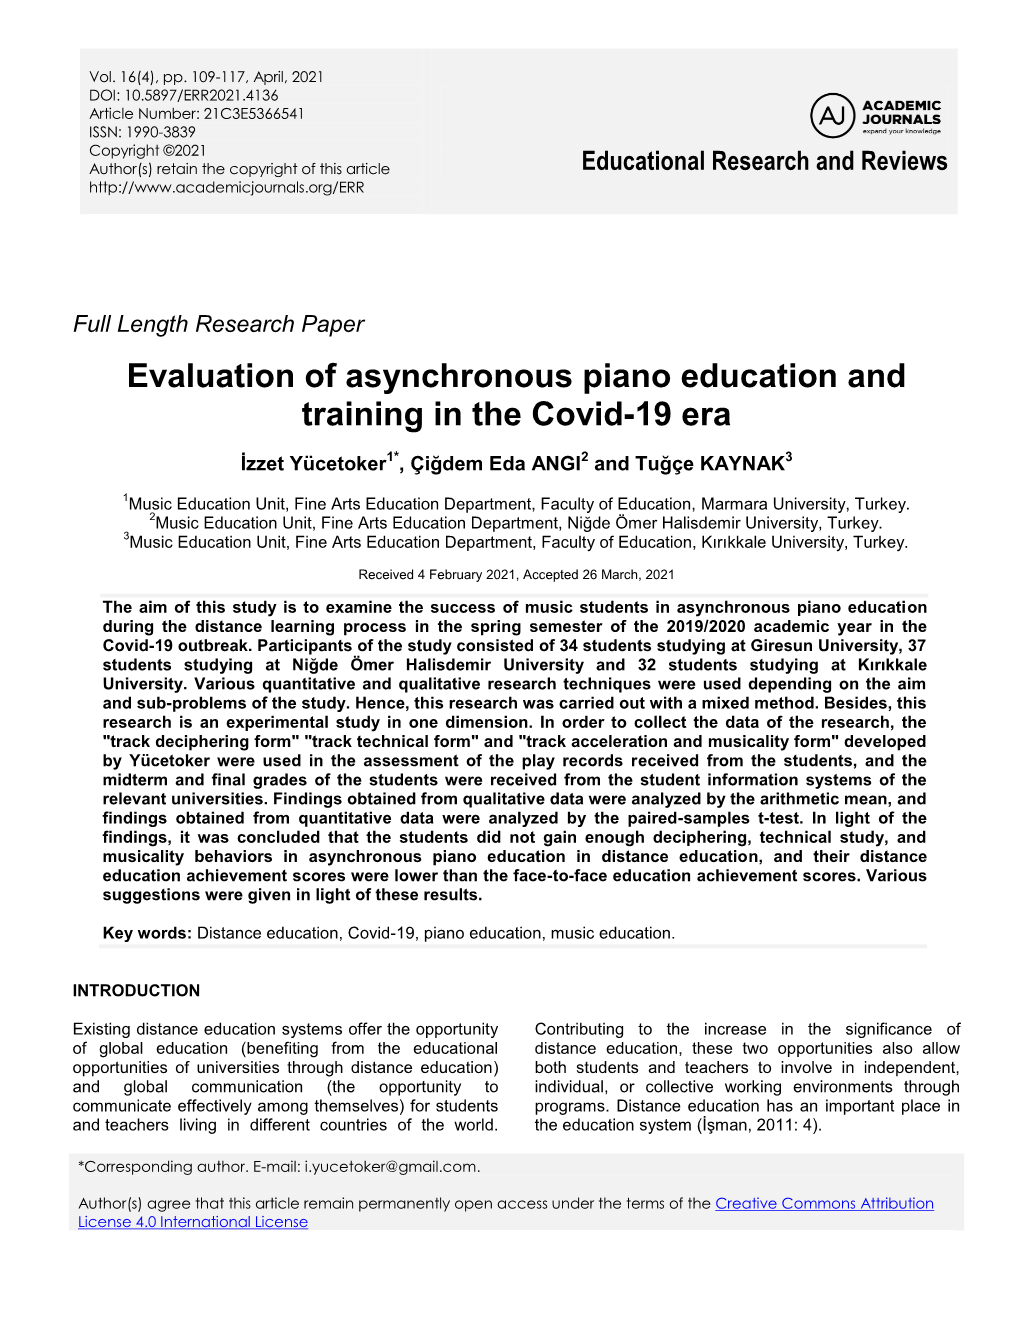 Evaluation of Asynchronous Piano Education and Training in the Covid-19 Era